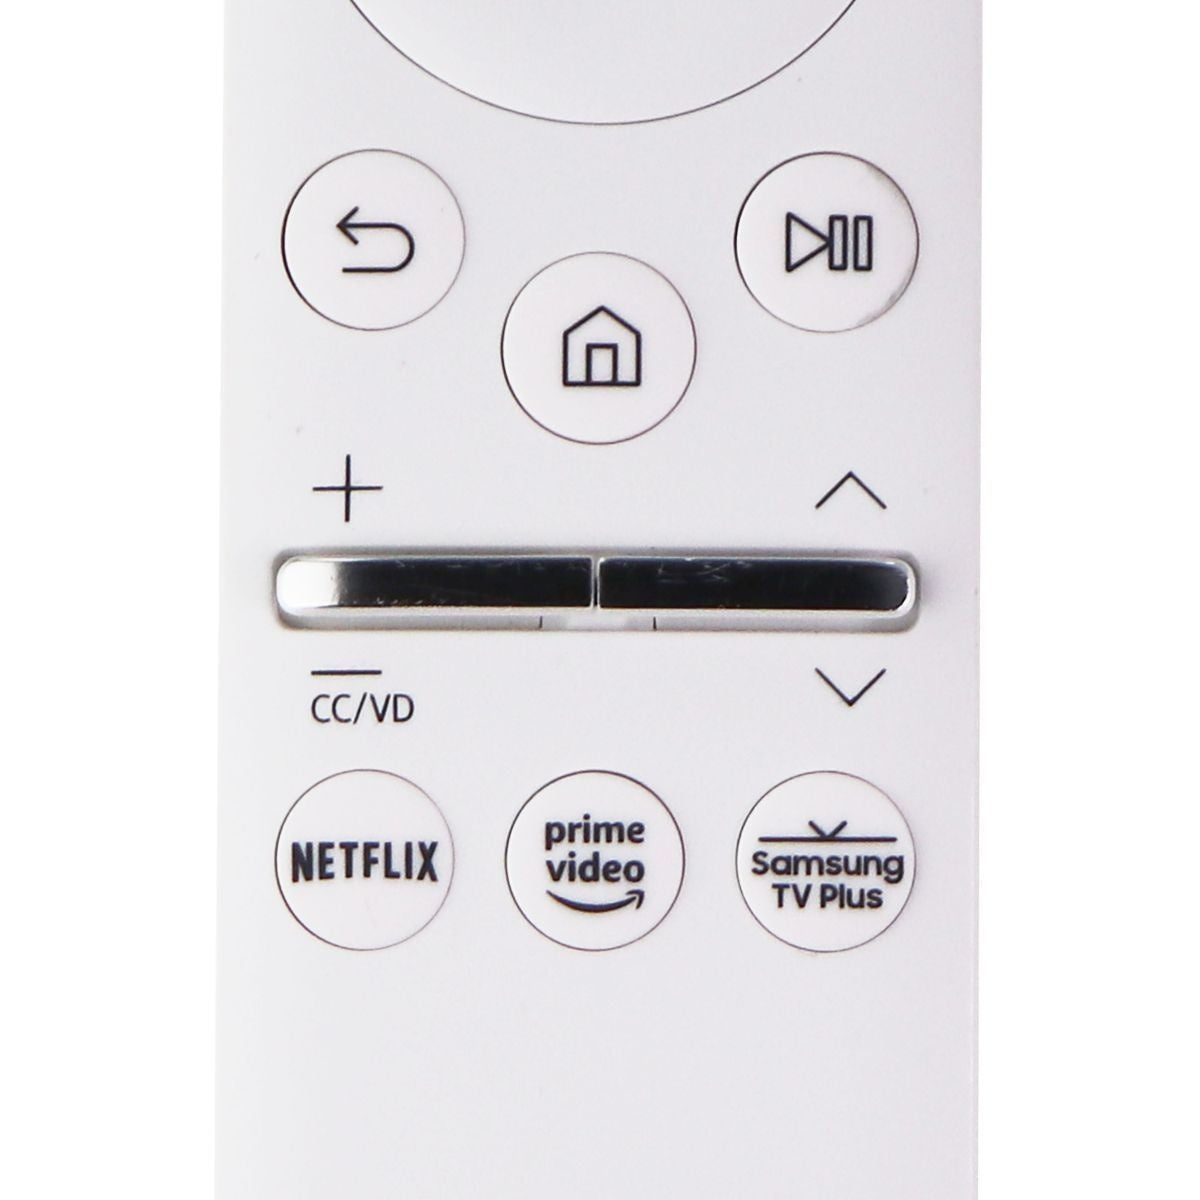 Samsung Remote Control (BN59-01330H / RMCSPR1AP1) for Smart TVs - White TV, Video & Audio Accessories - Remote Controls Samsung    - Simple Cell Bulk Wholesale Pricing - USA Seller